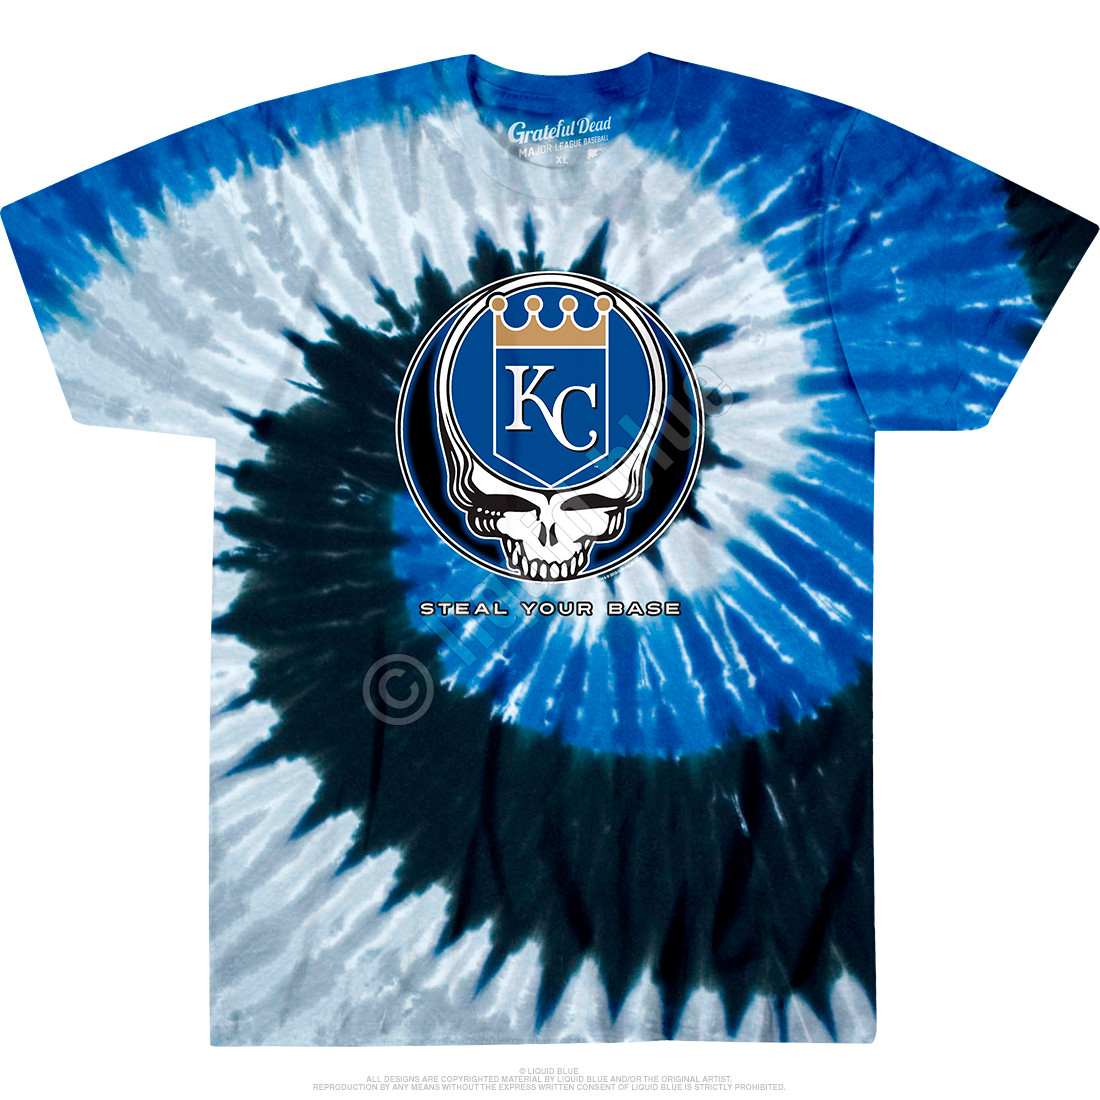 all about that base royals shirt